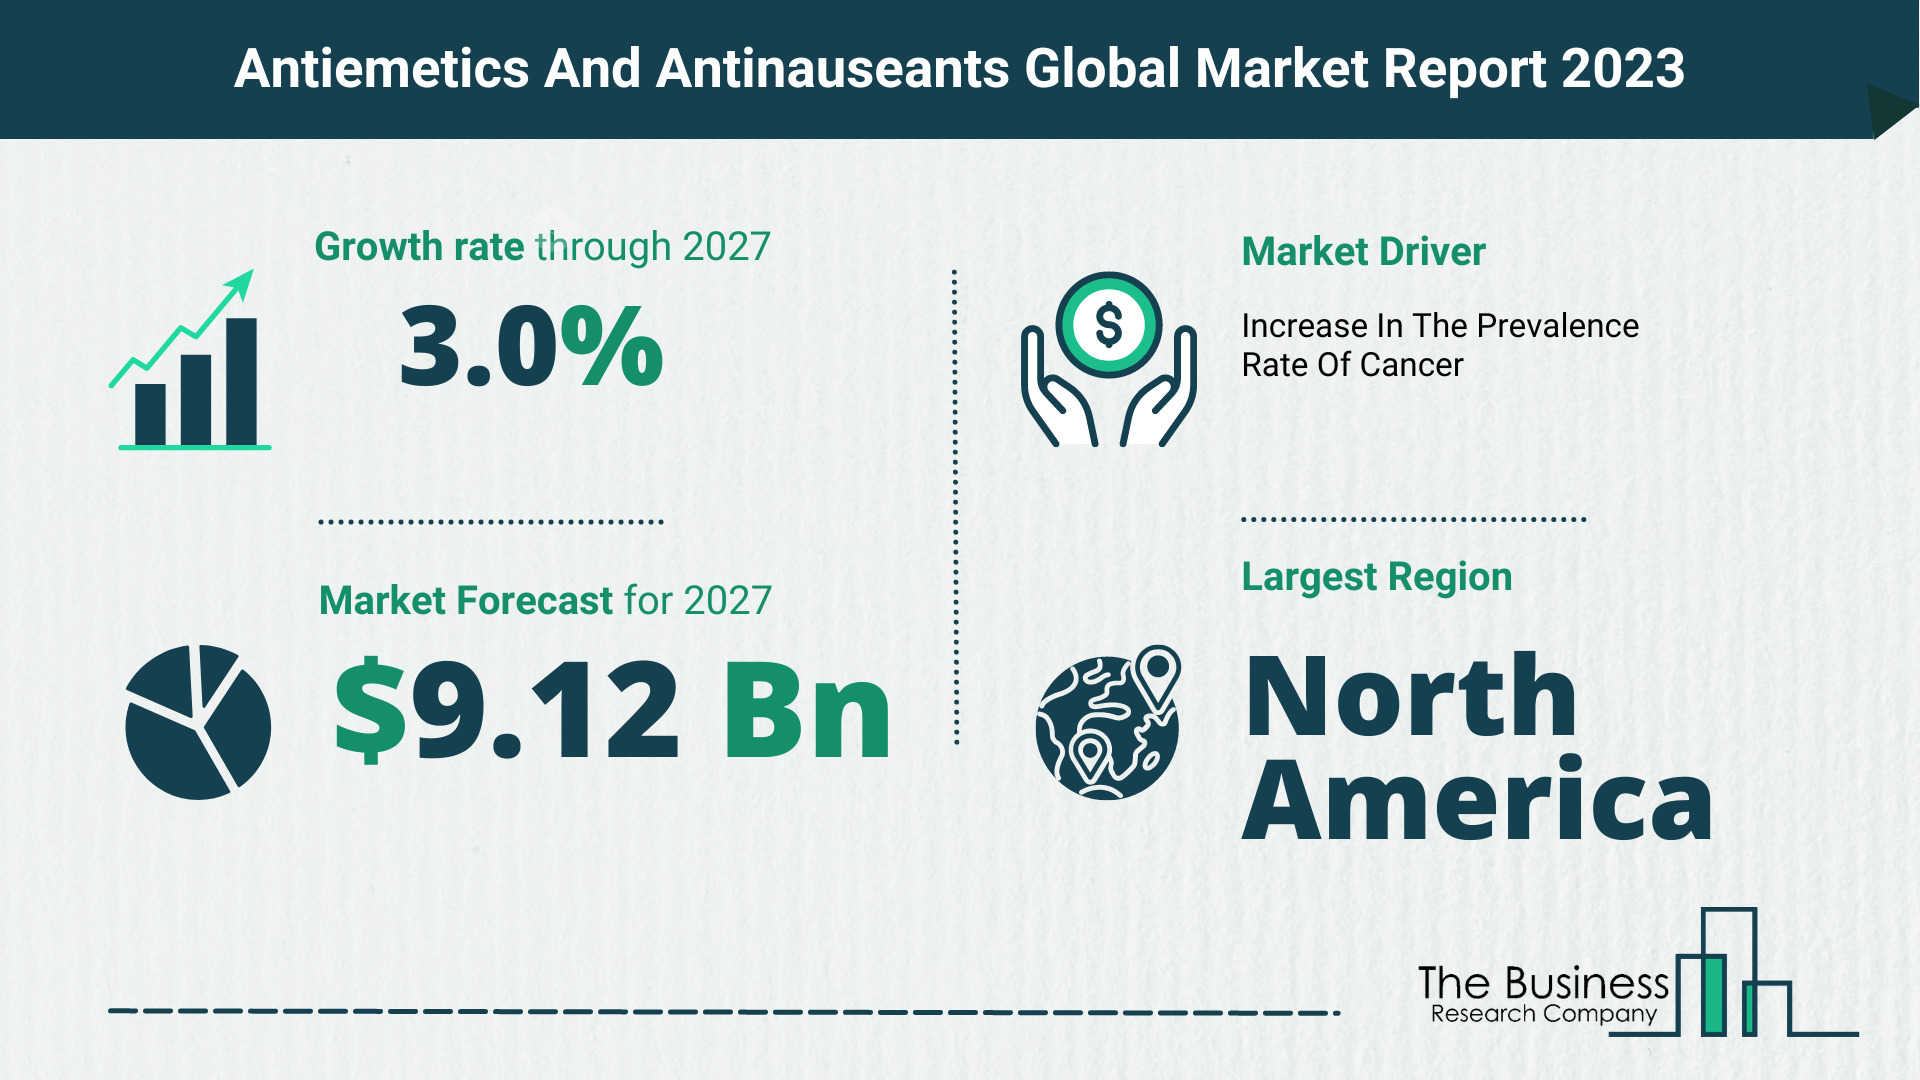 What Will The Antiemetics And Antinauseants Market Look Like In 2023?